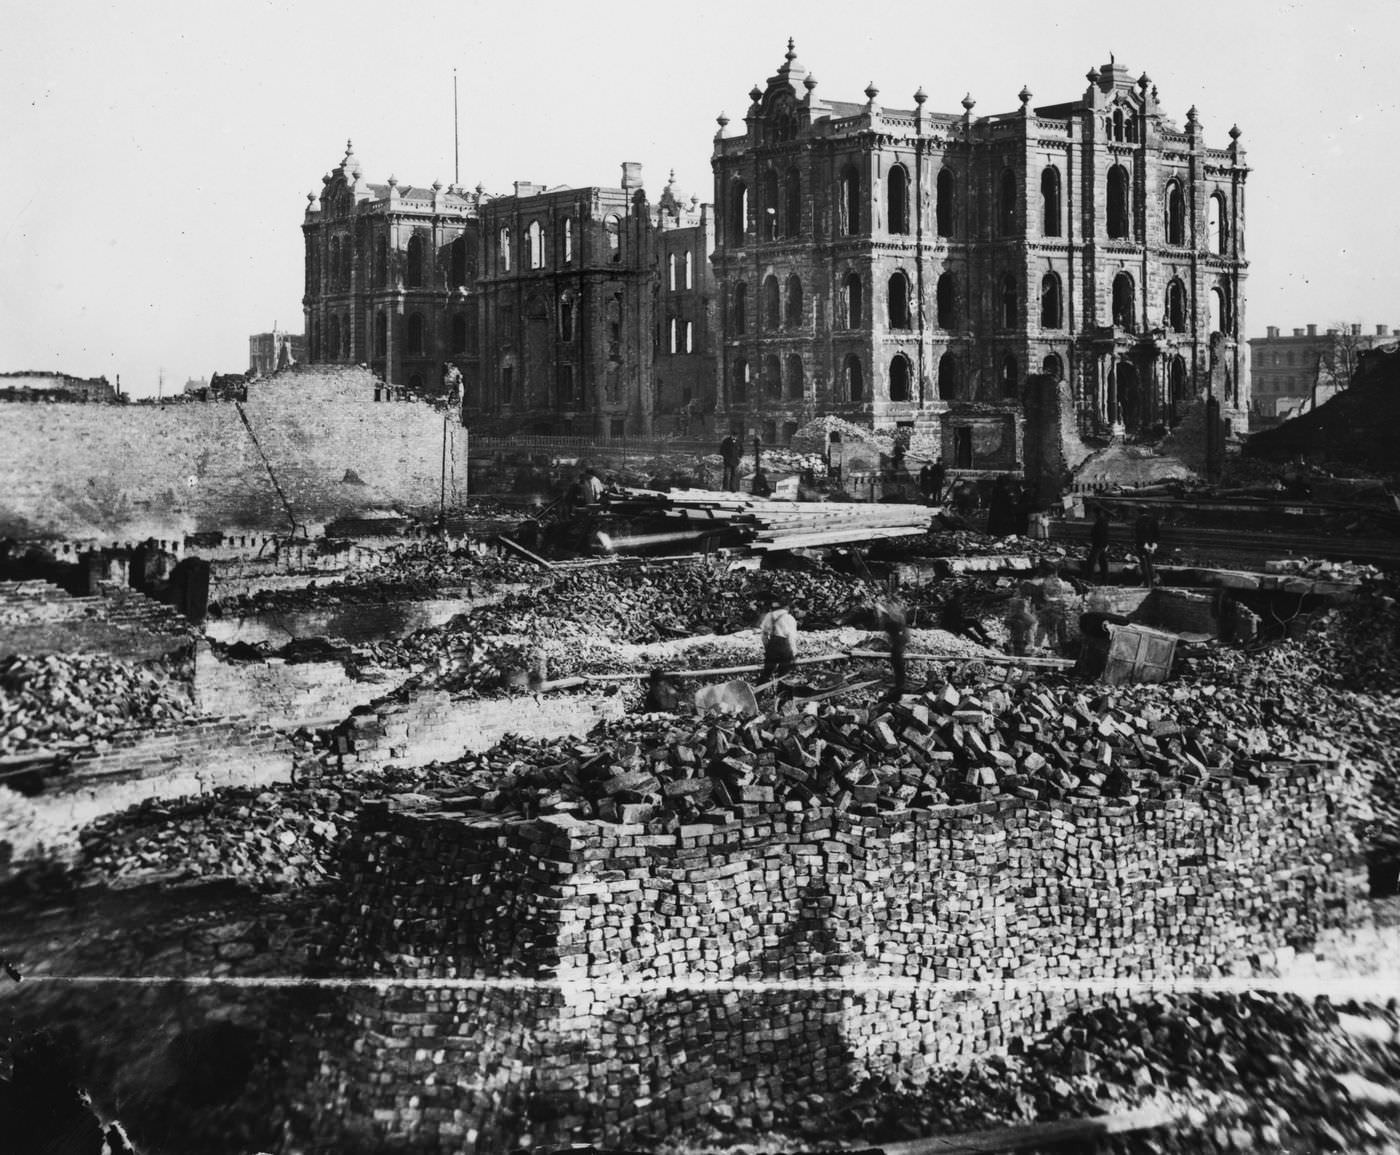 Workers walk through the wreckage near the remains of the courthouse and City Hall, background, in the aftermath of the Great Chicago Fire.